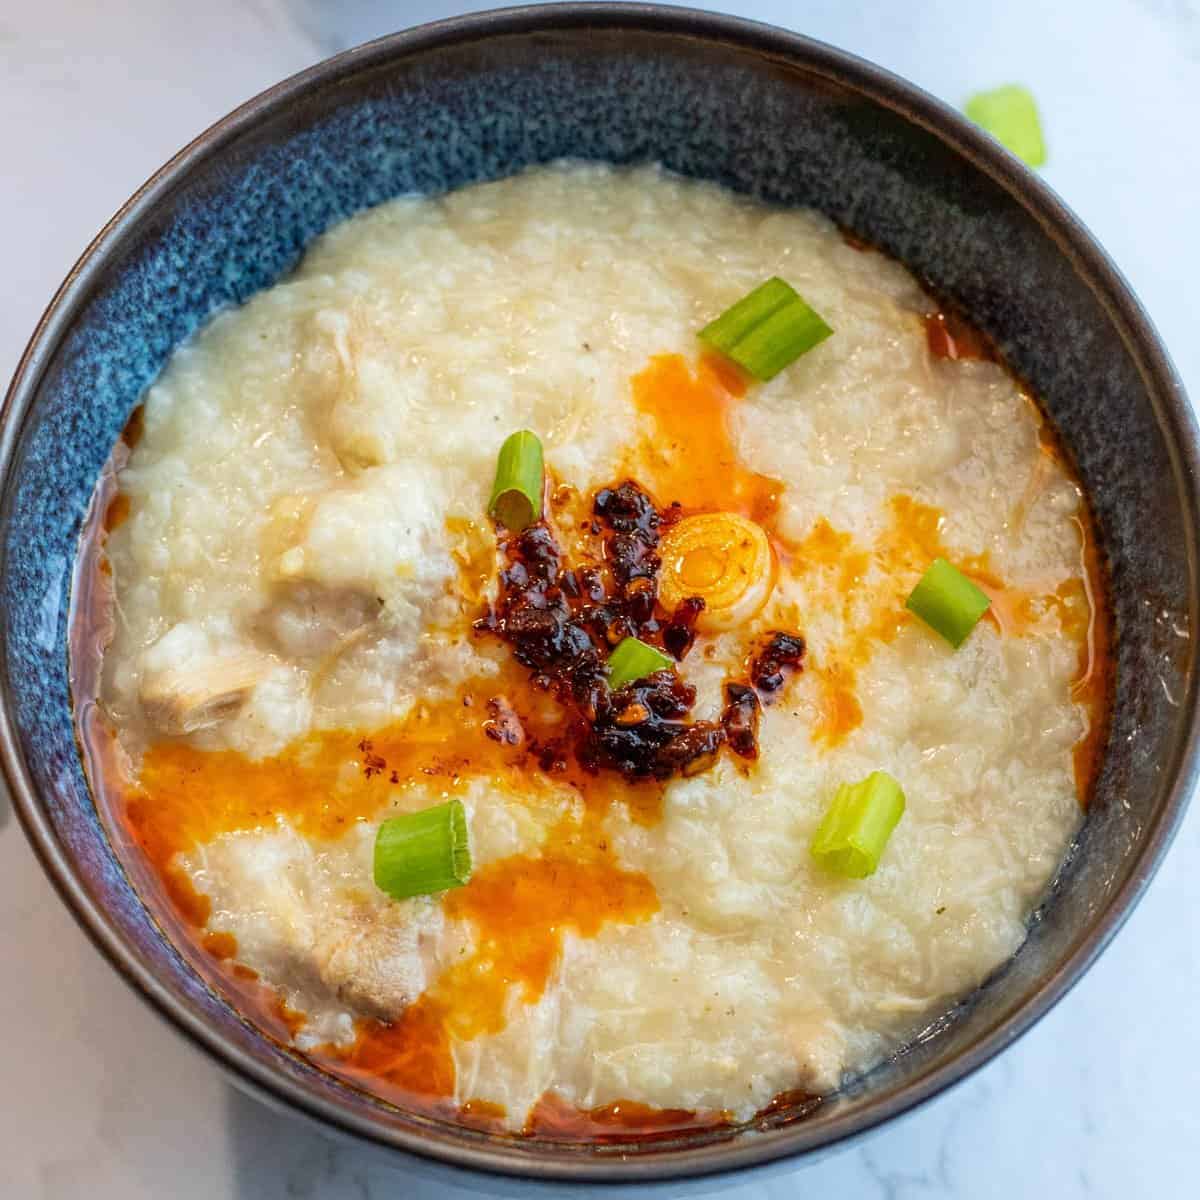 https://theodehlicious.com/wp-content/uploads/2022/04/Instant-pot-chicken-congee-featured-image.jpg